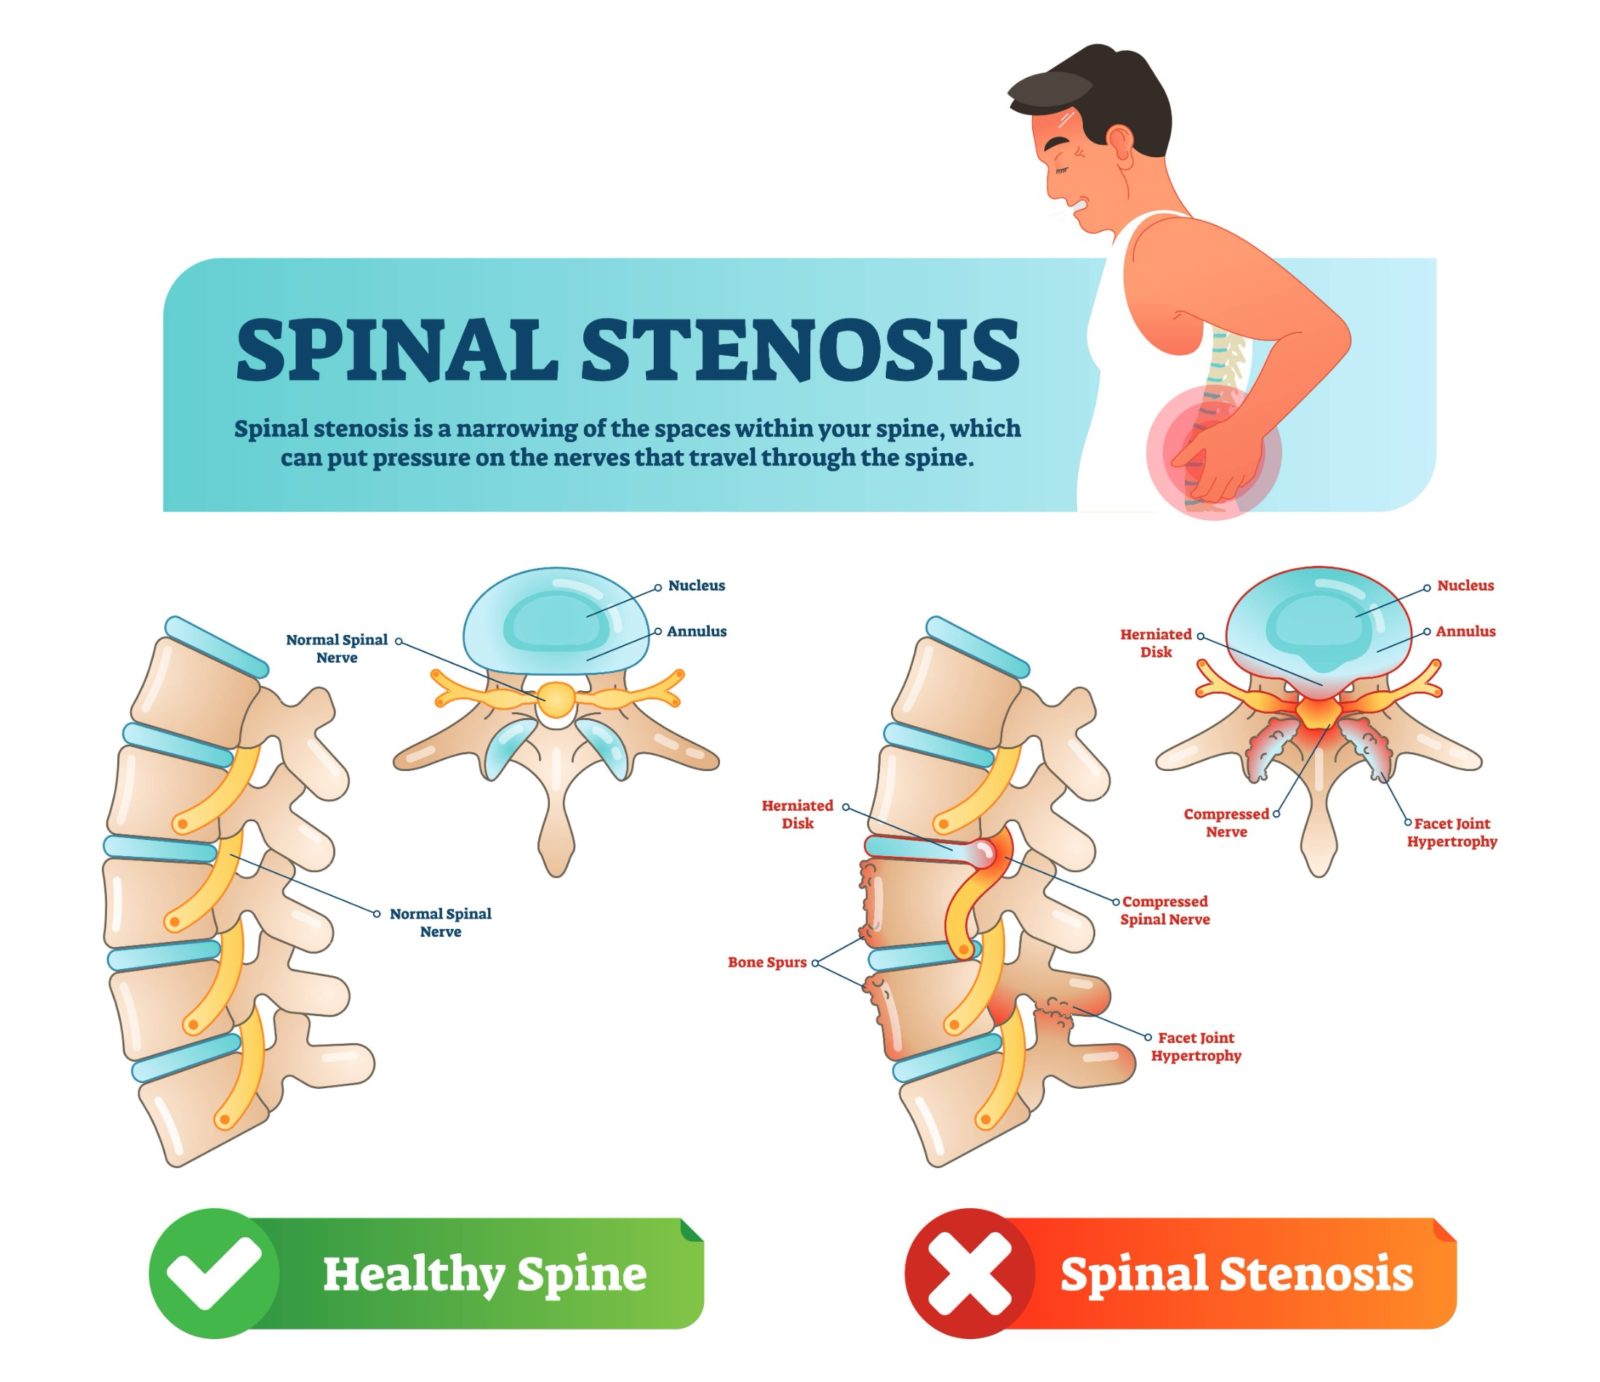 healthy spine vs Spinal Stenosis